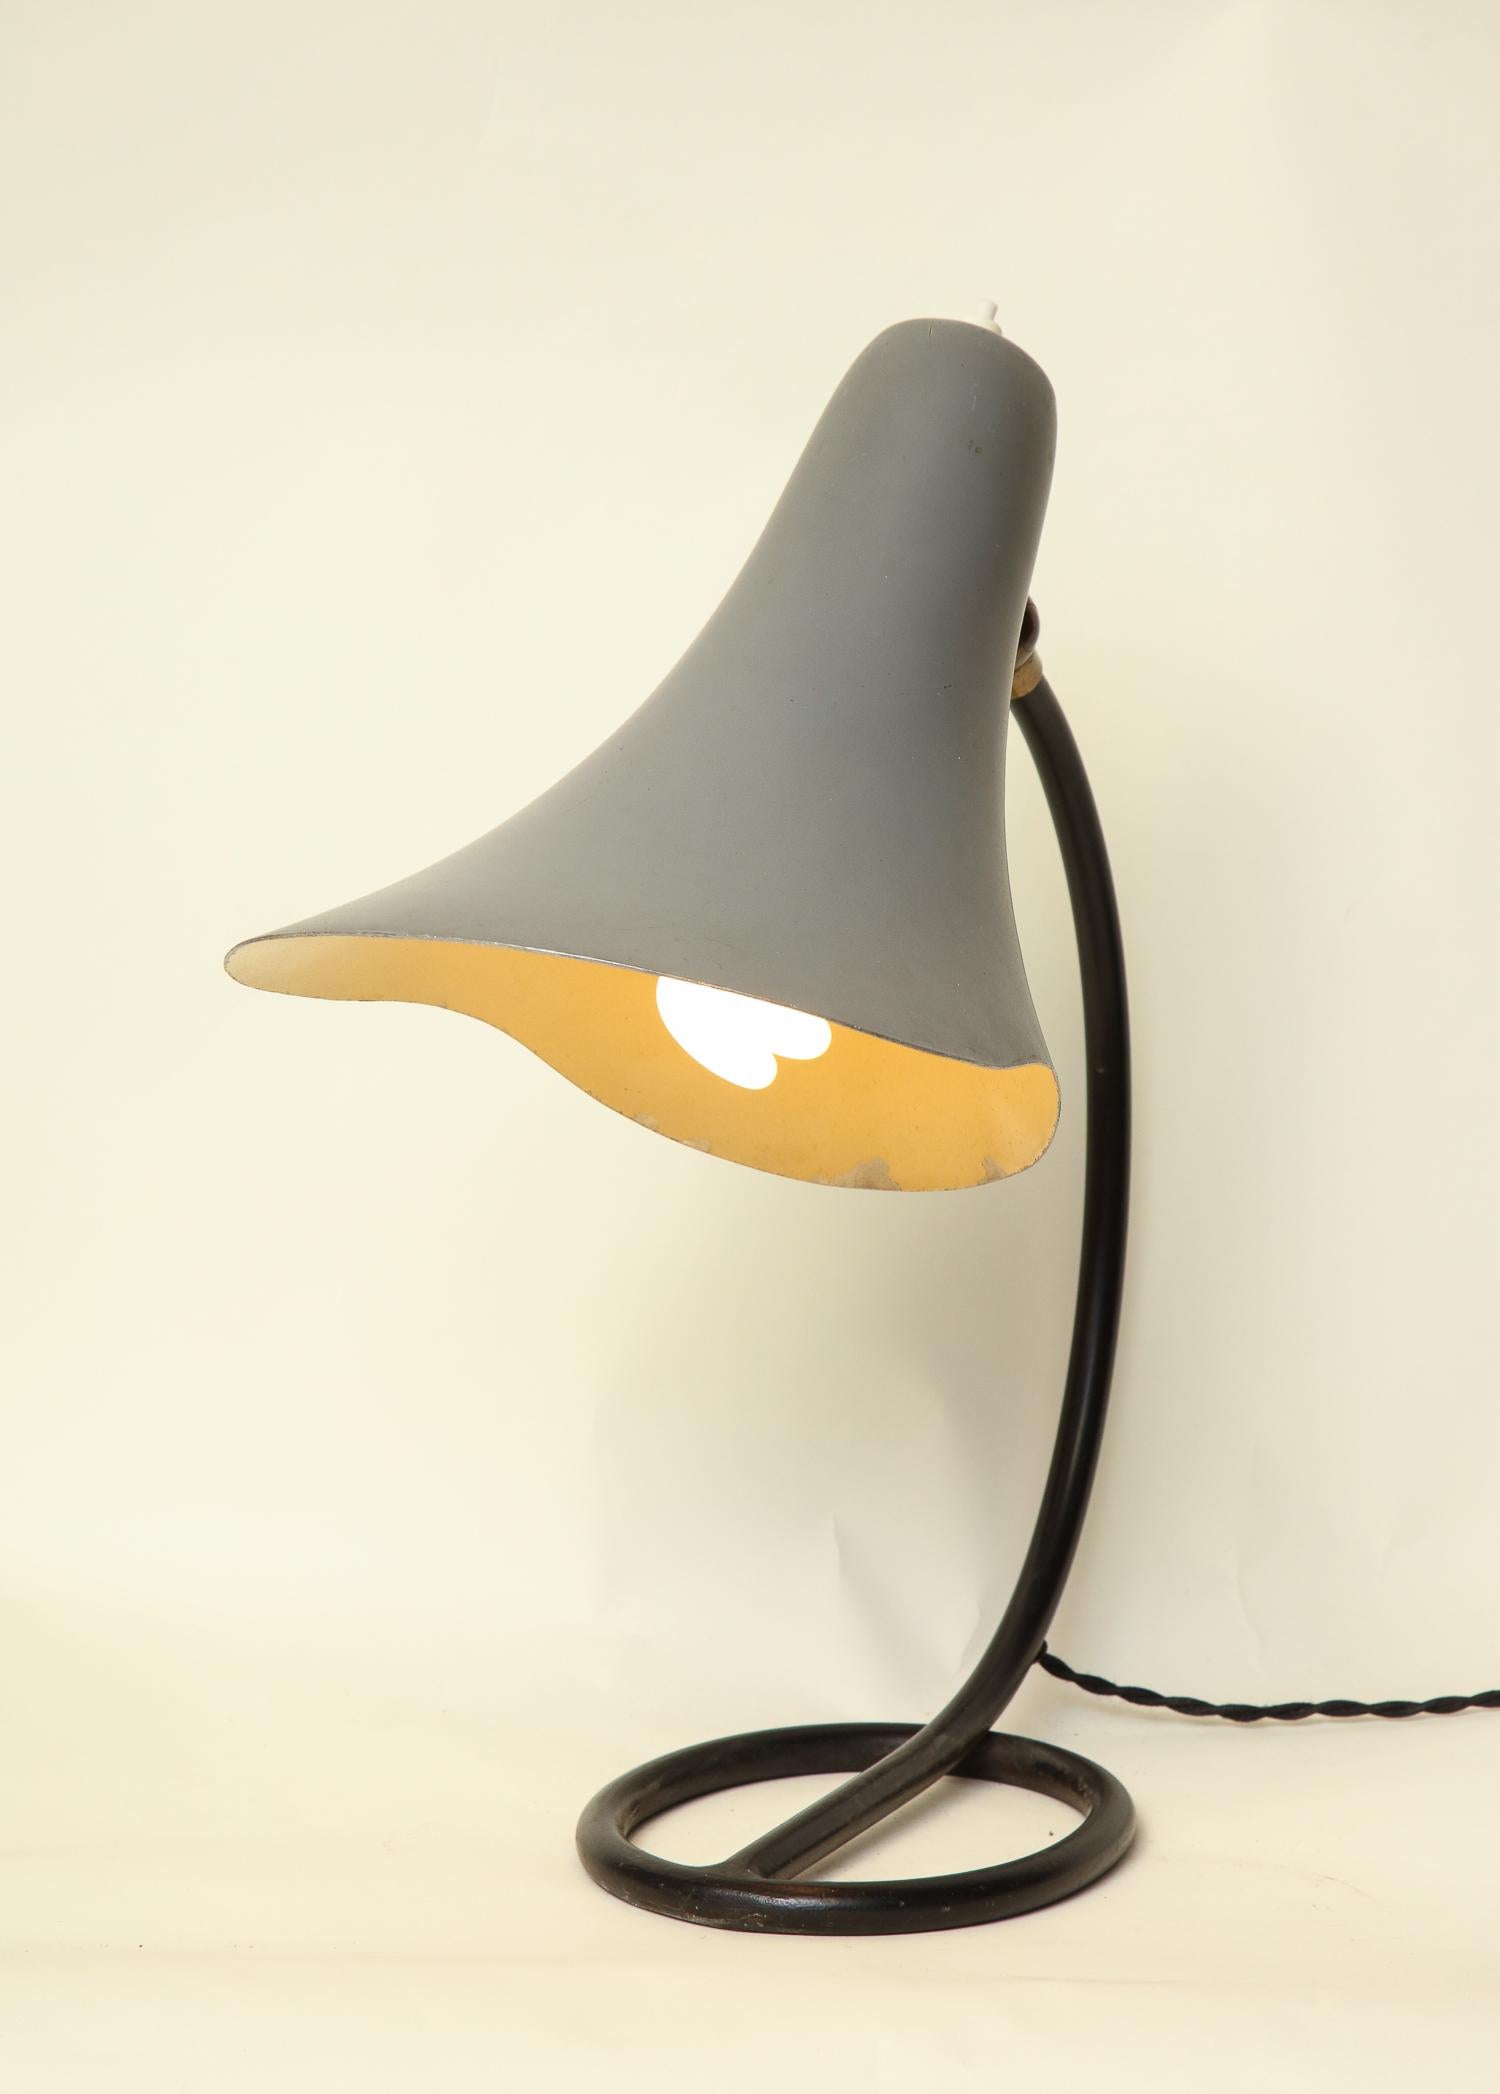 Articulated Table Lamp Mid-Century Modern Painted Metal Shade Adjusts Italy 1950 In Good Condition For Sale In New York, NY